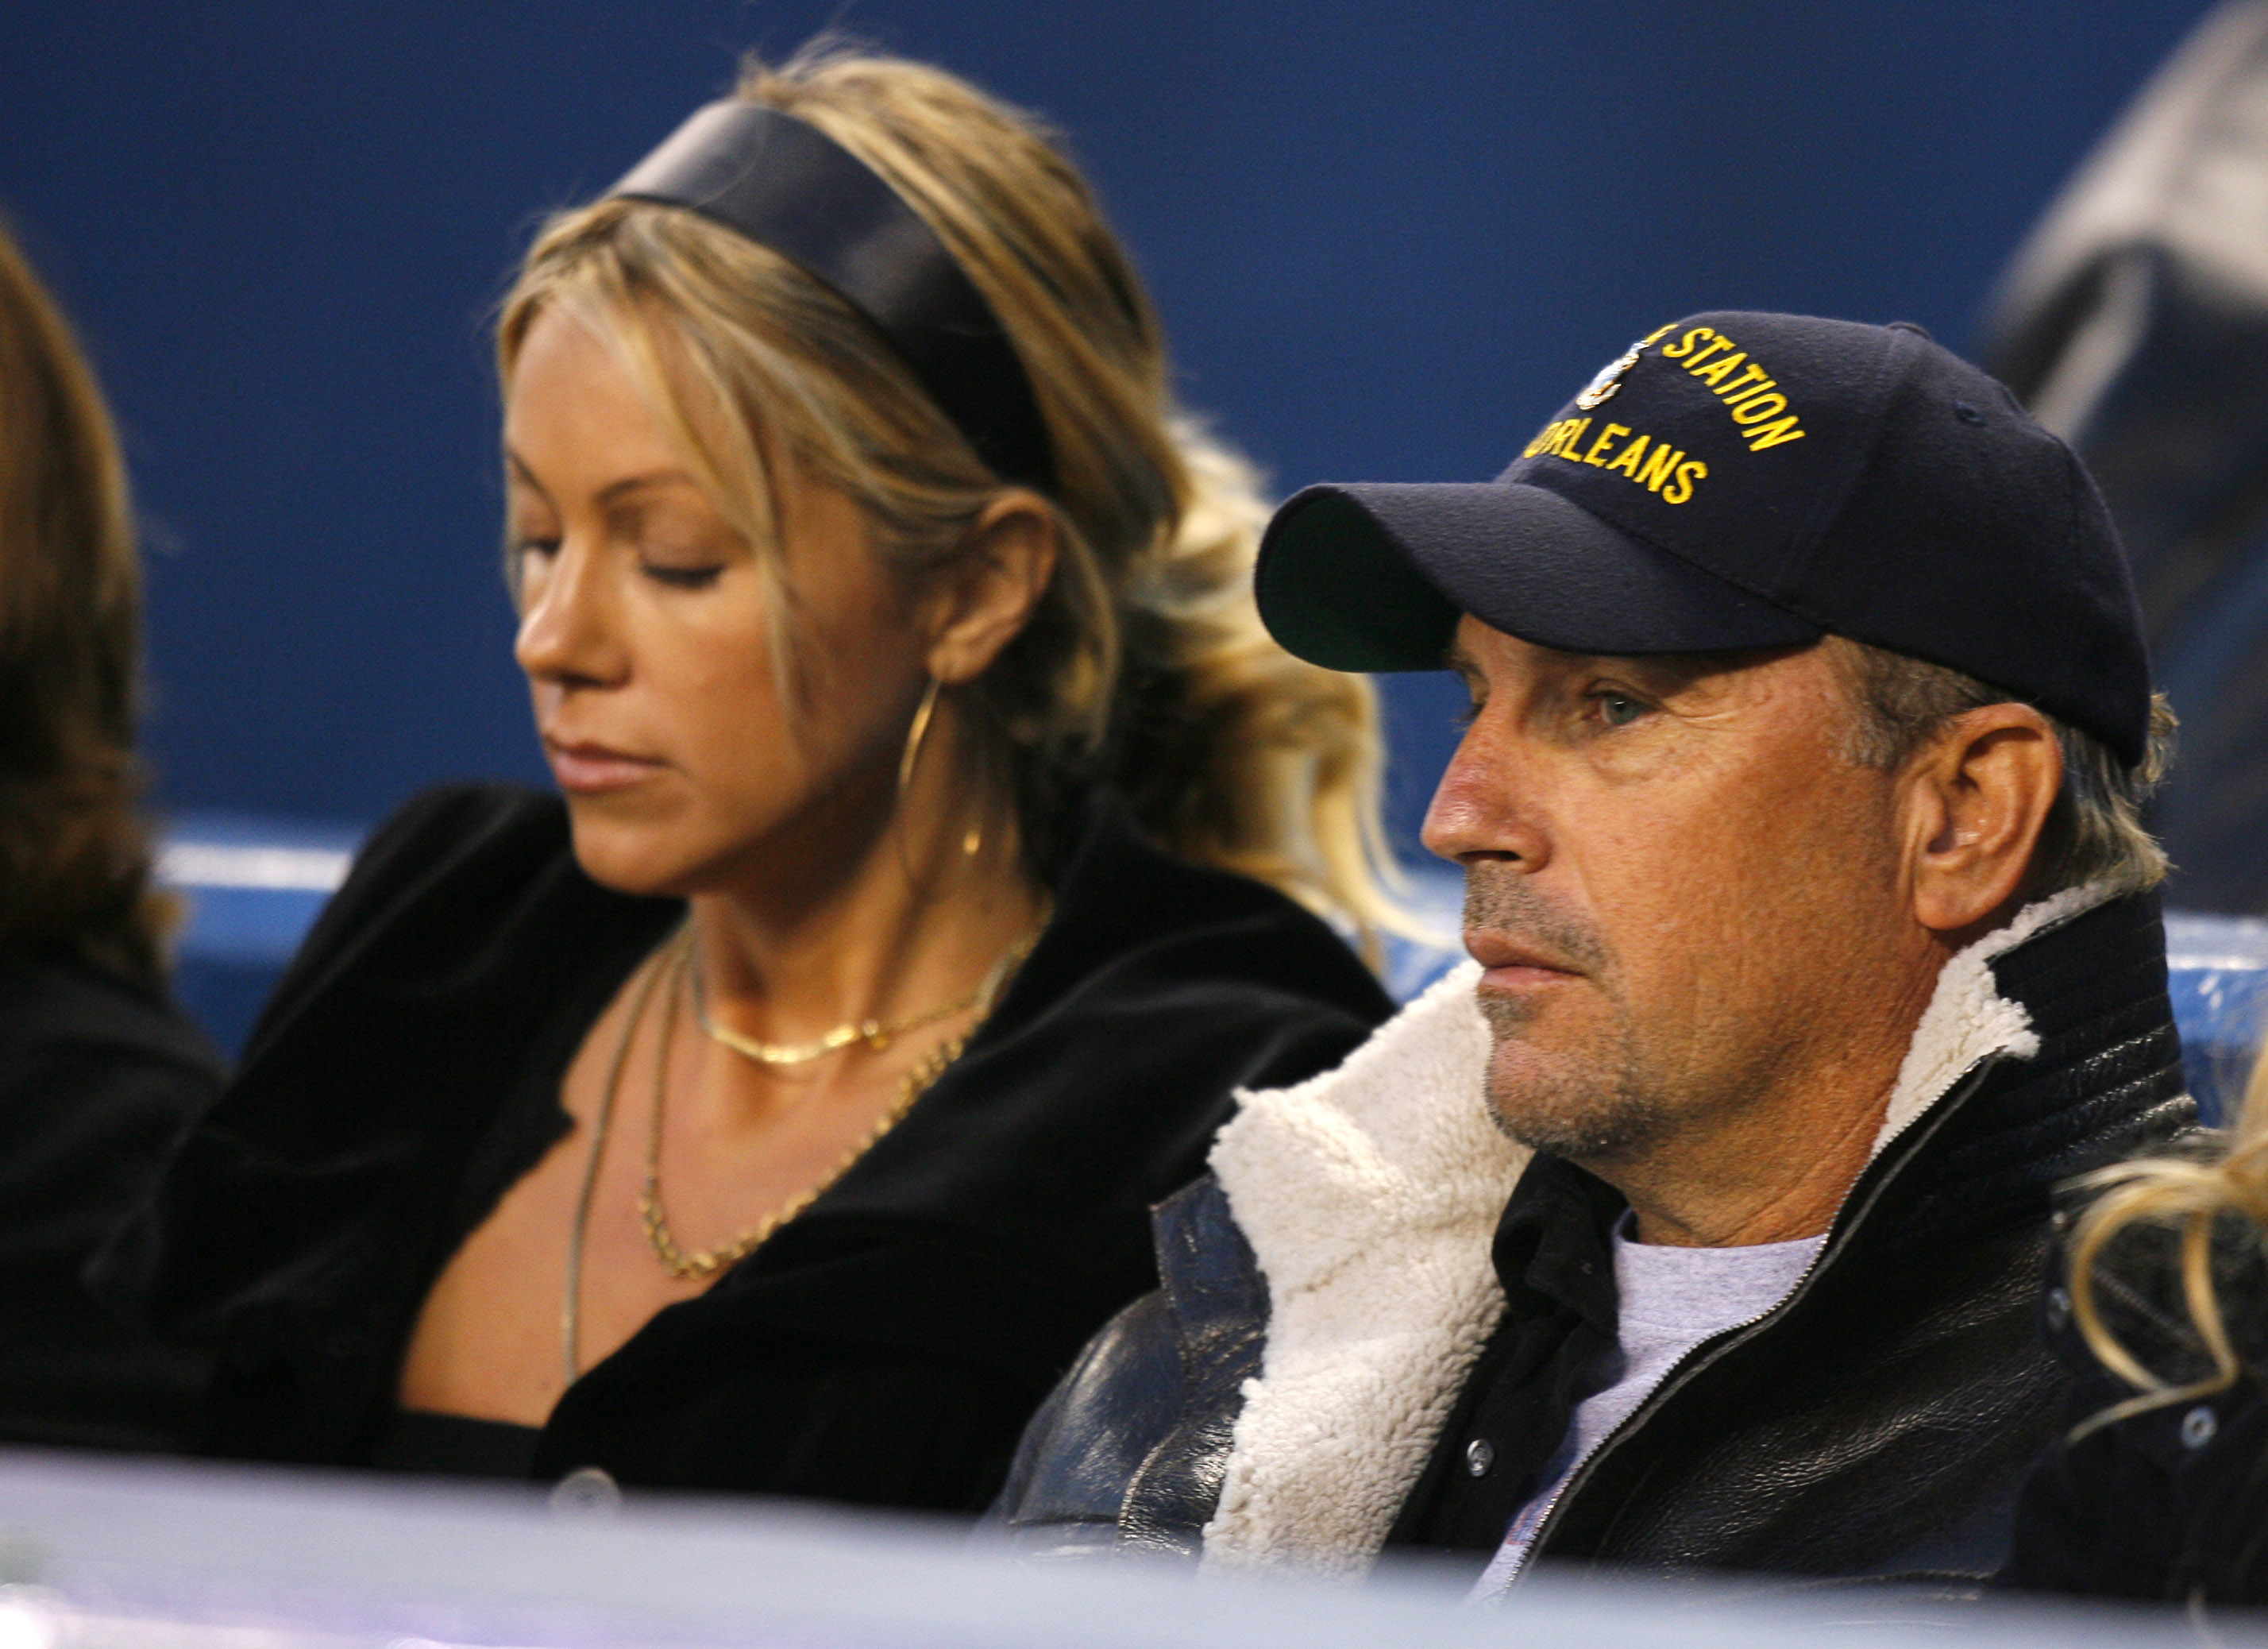 Christine Baumgartner and Kevin Costner spotted at a game between the New York Yankees and the Tampa Bay Devil Rays in the Bronx, New York on September 12, 2006 | Source: Getty Images